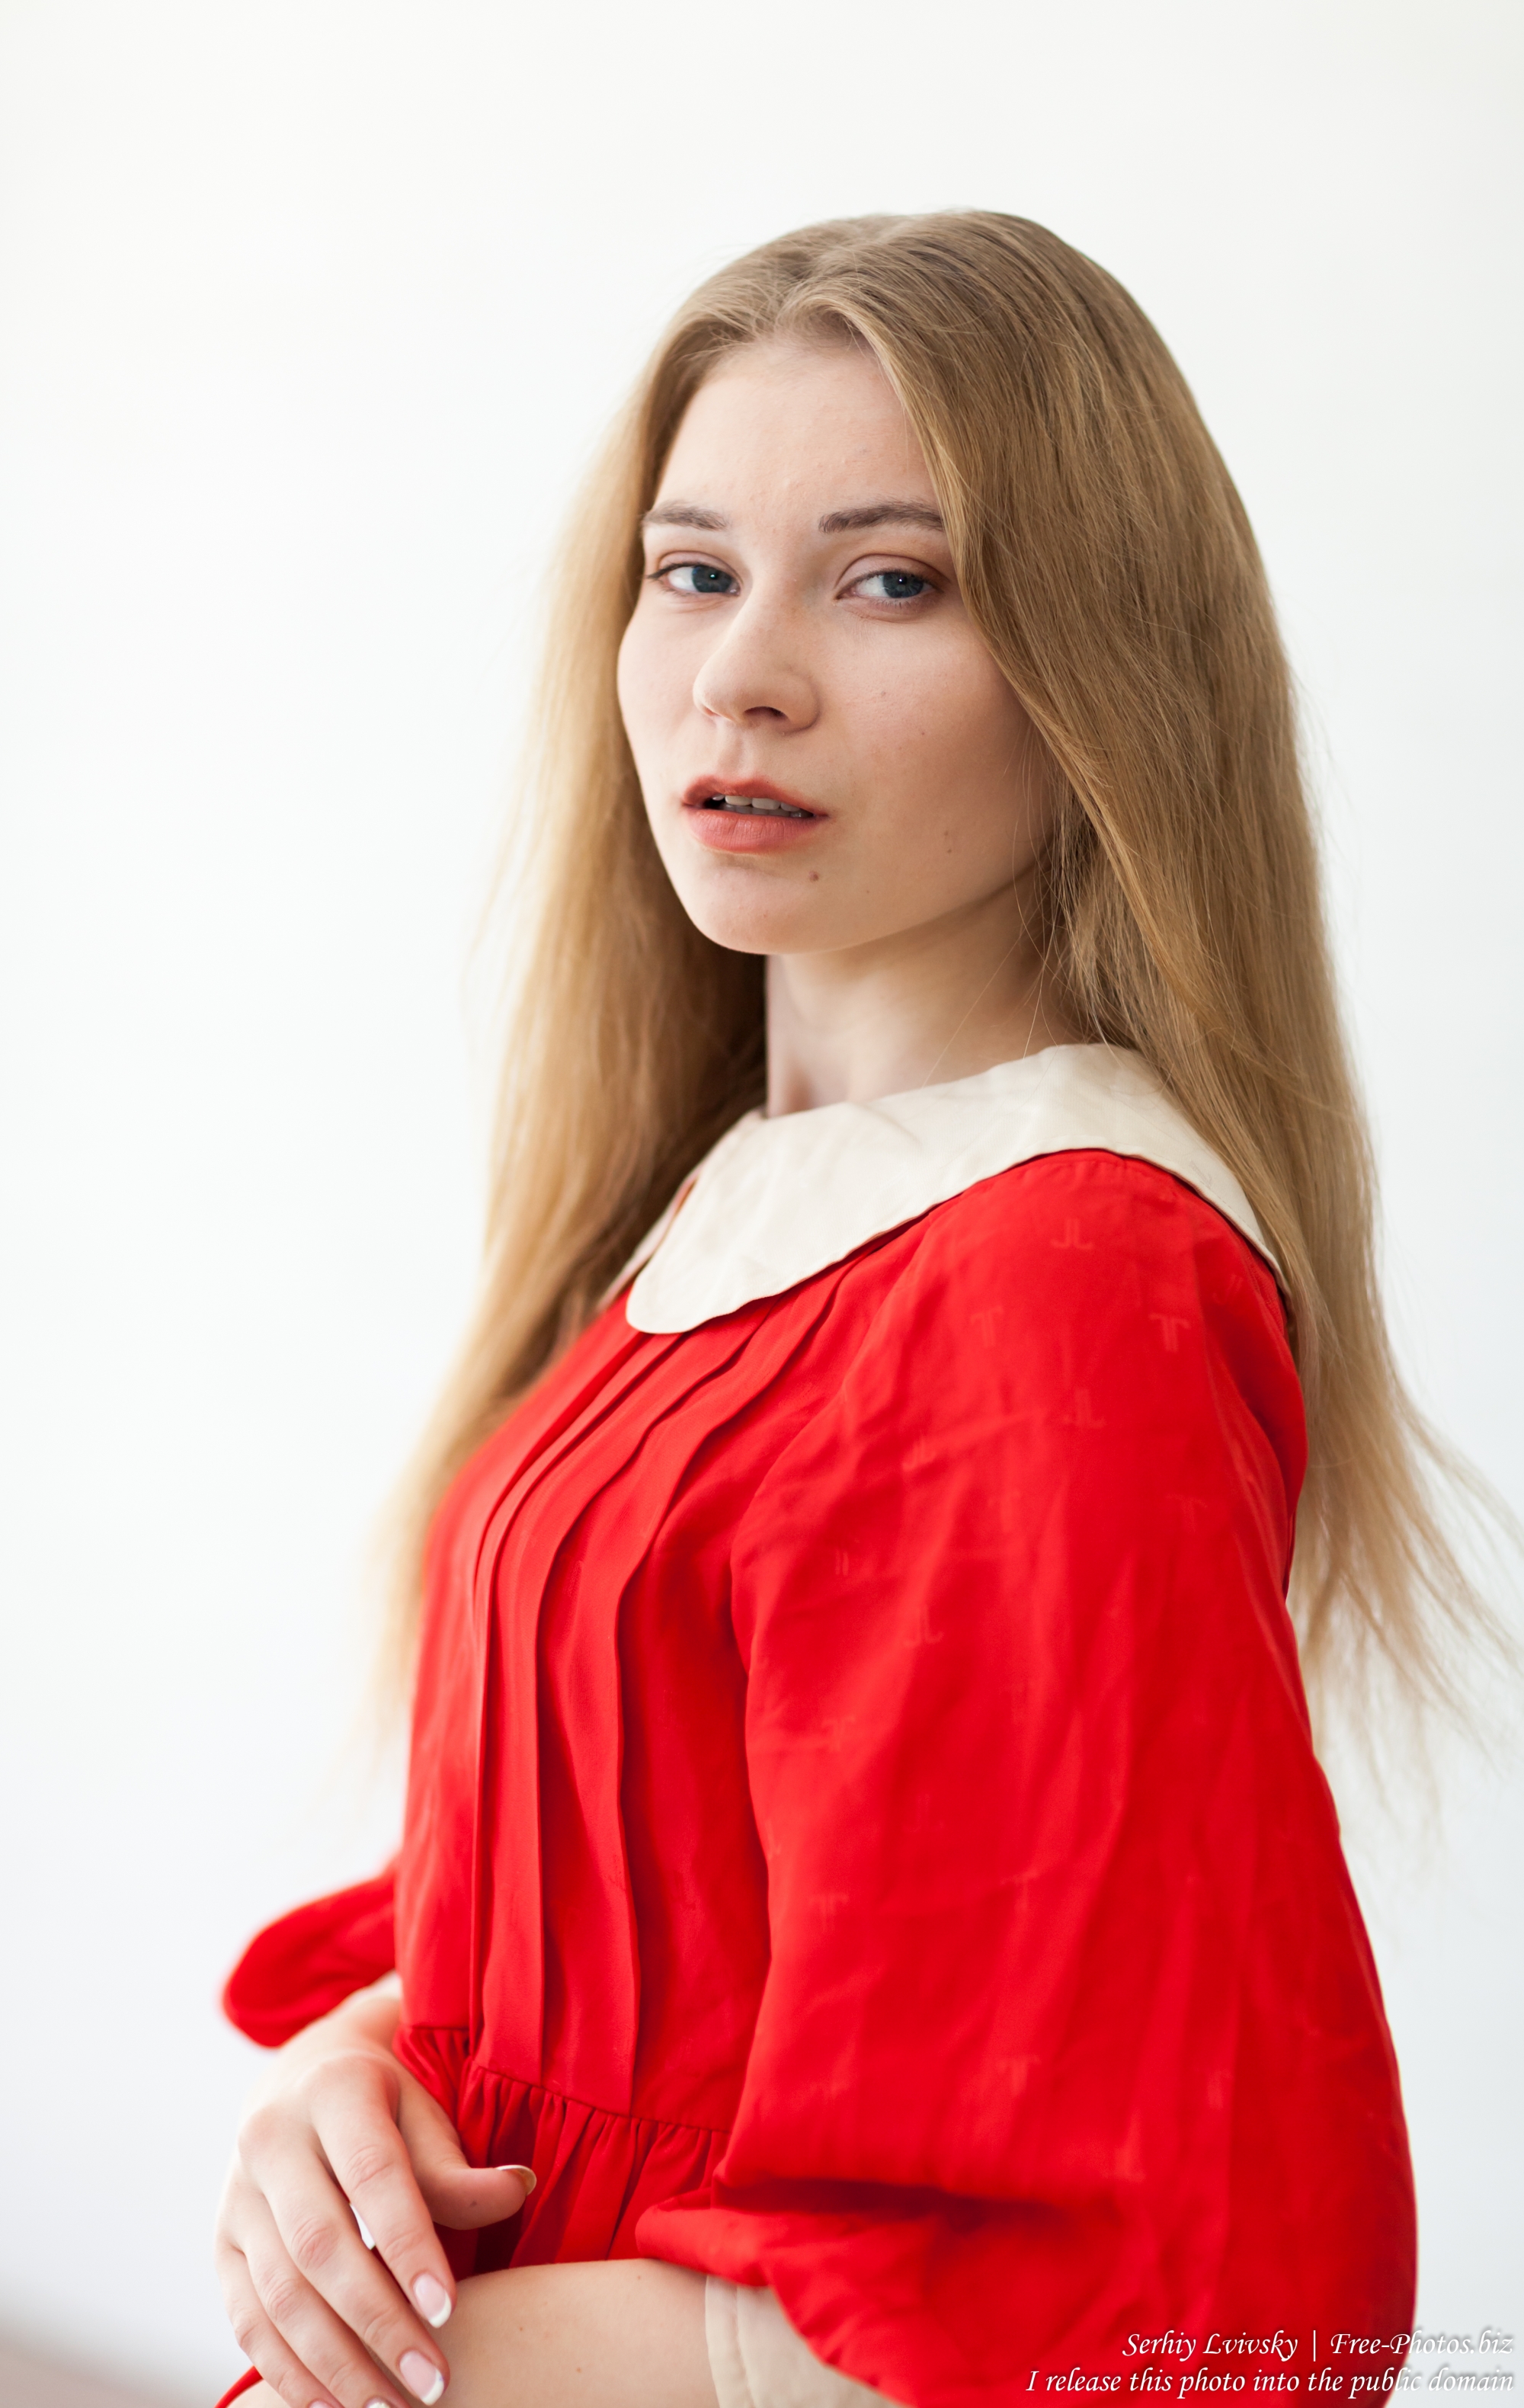 vladyslava_an_18-year-old_natural_blonde_girl_photographed_in_june_2017_by_serhiy_lvivsky_01